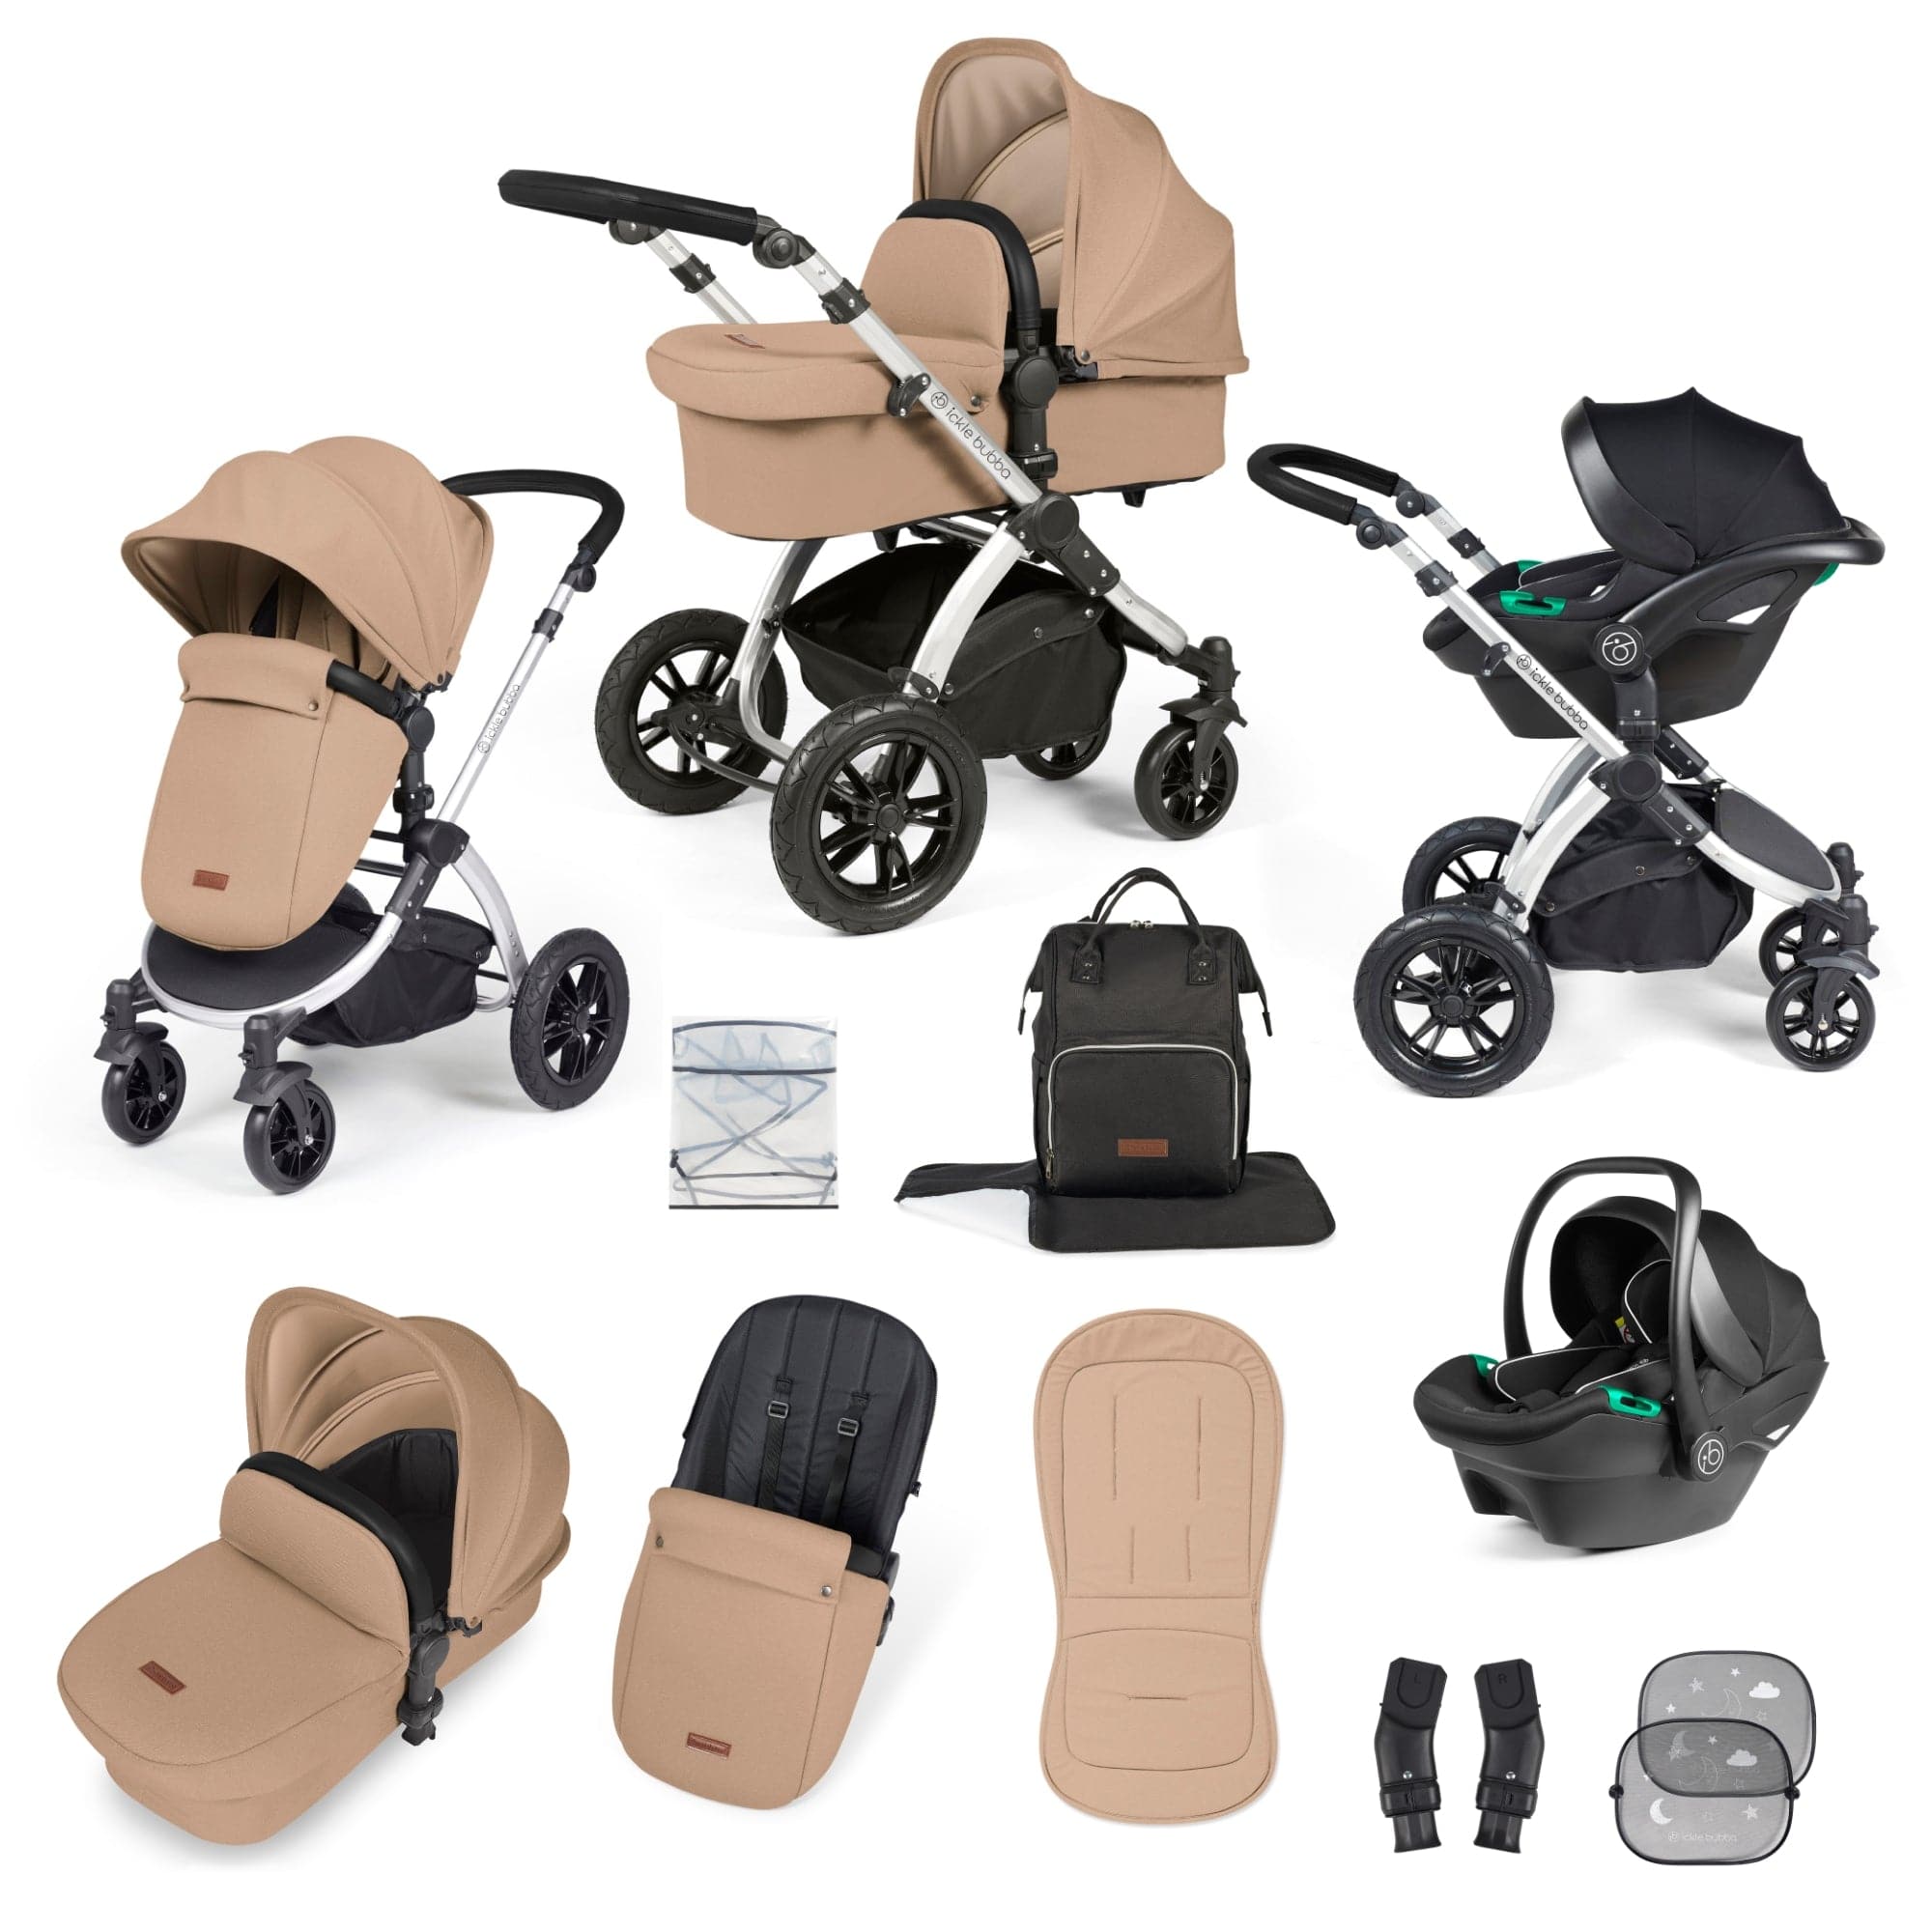 Ickle Bubba Stomp Luxe All-In-One I-Size Travel System With Isofix Base - Silver / Desert / Black   